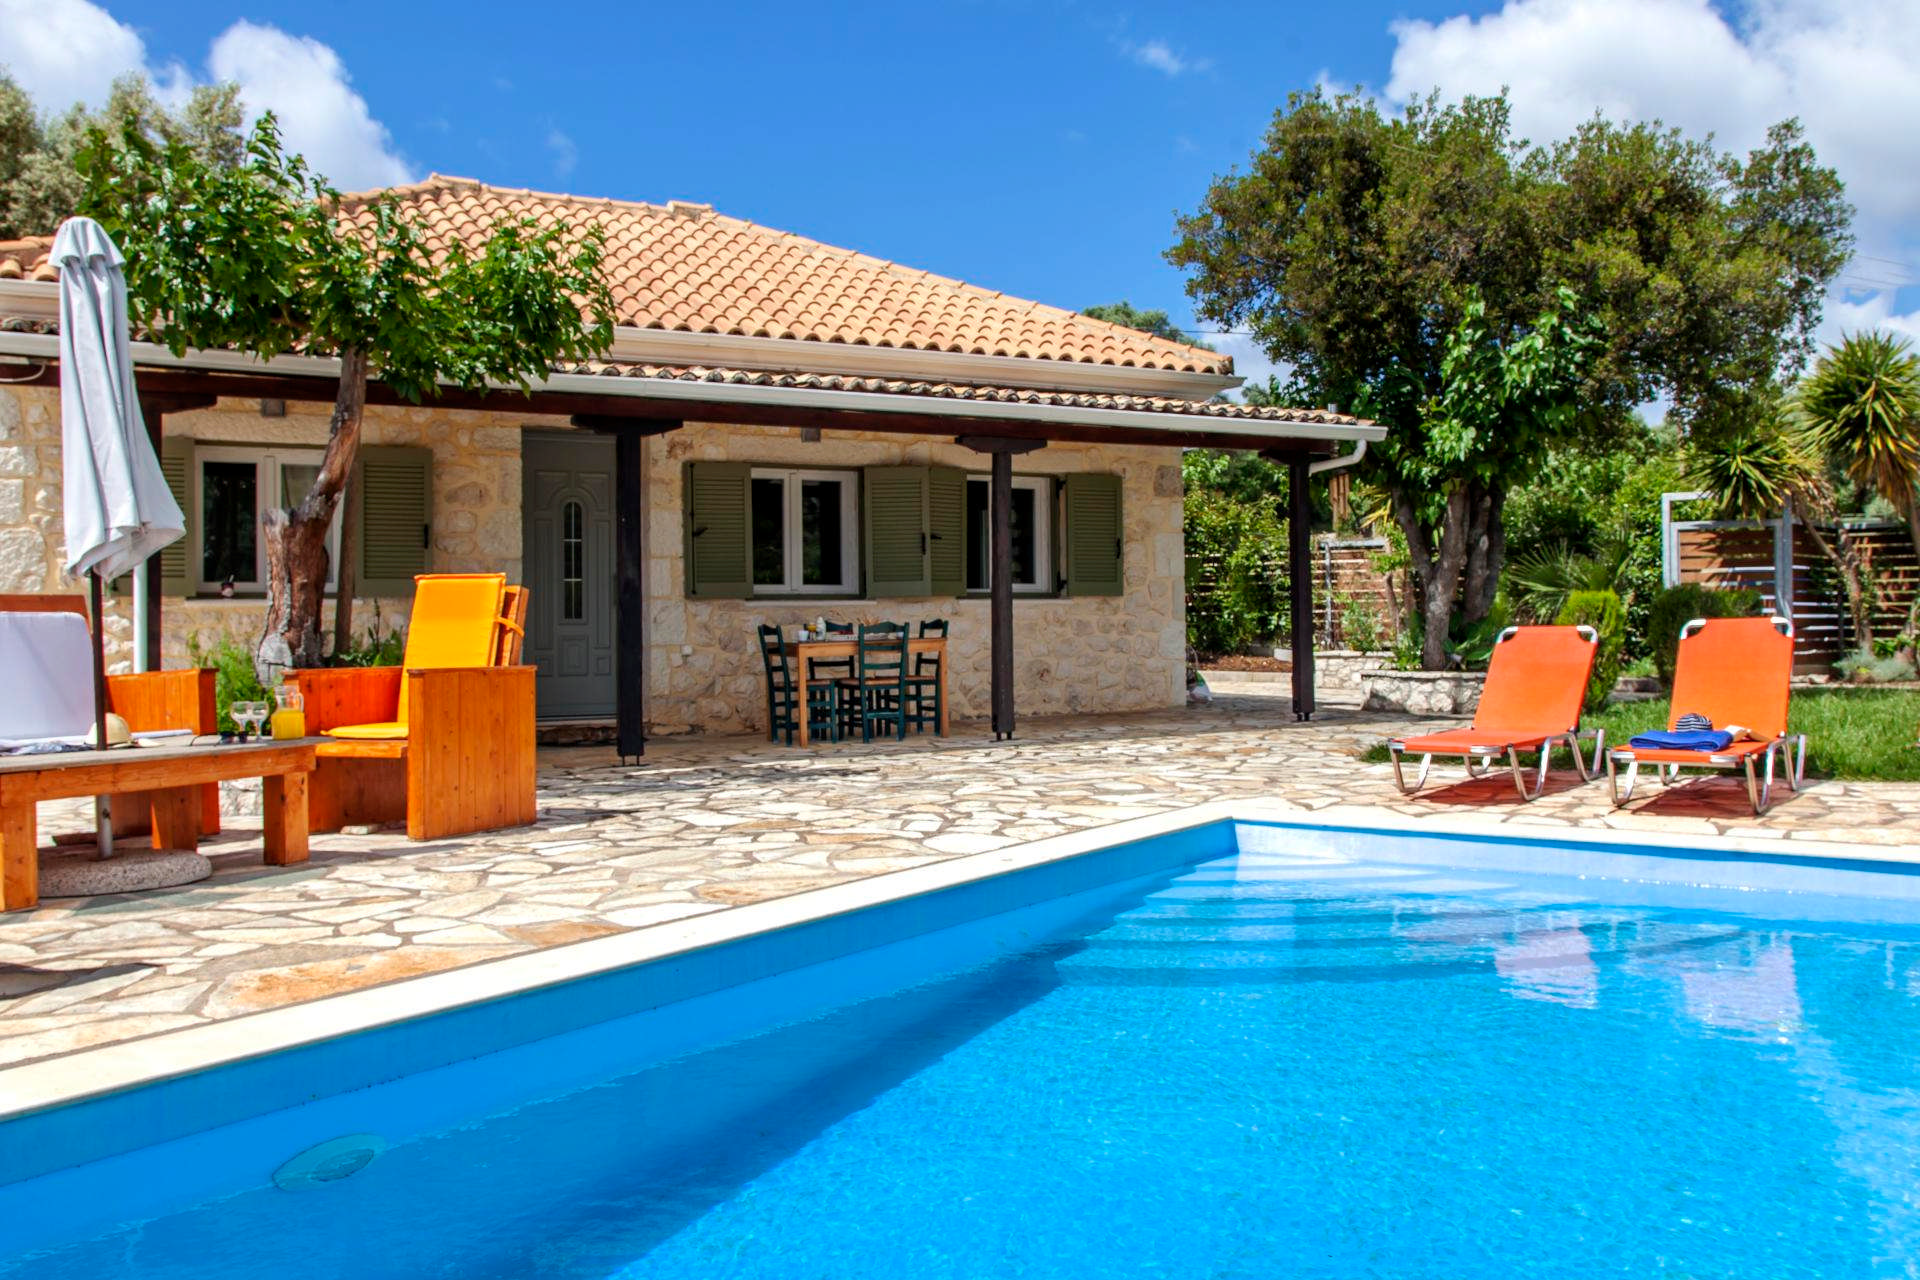 Couples can enjoy a romantic break to Lefkada staying at the cosy cottage of Melodia